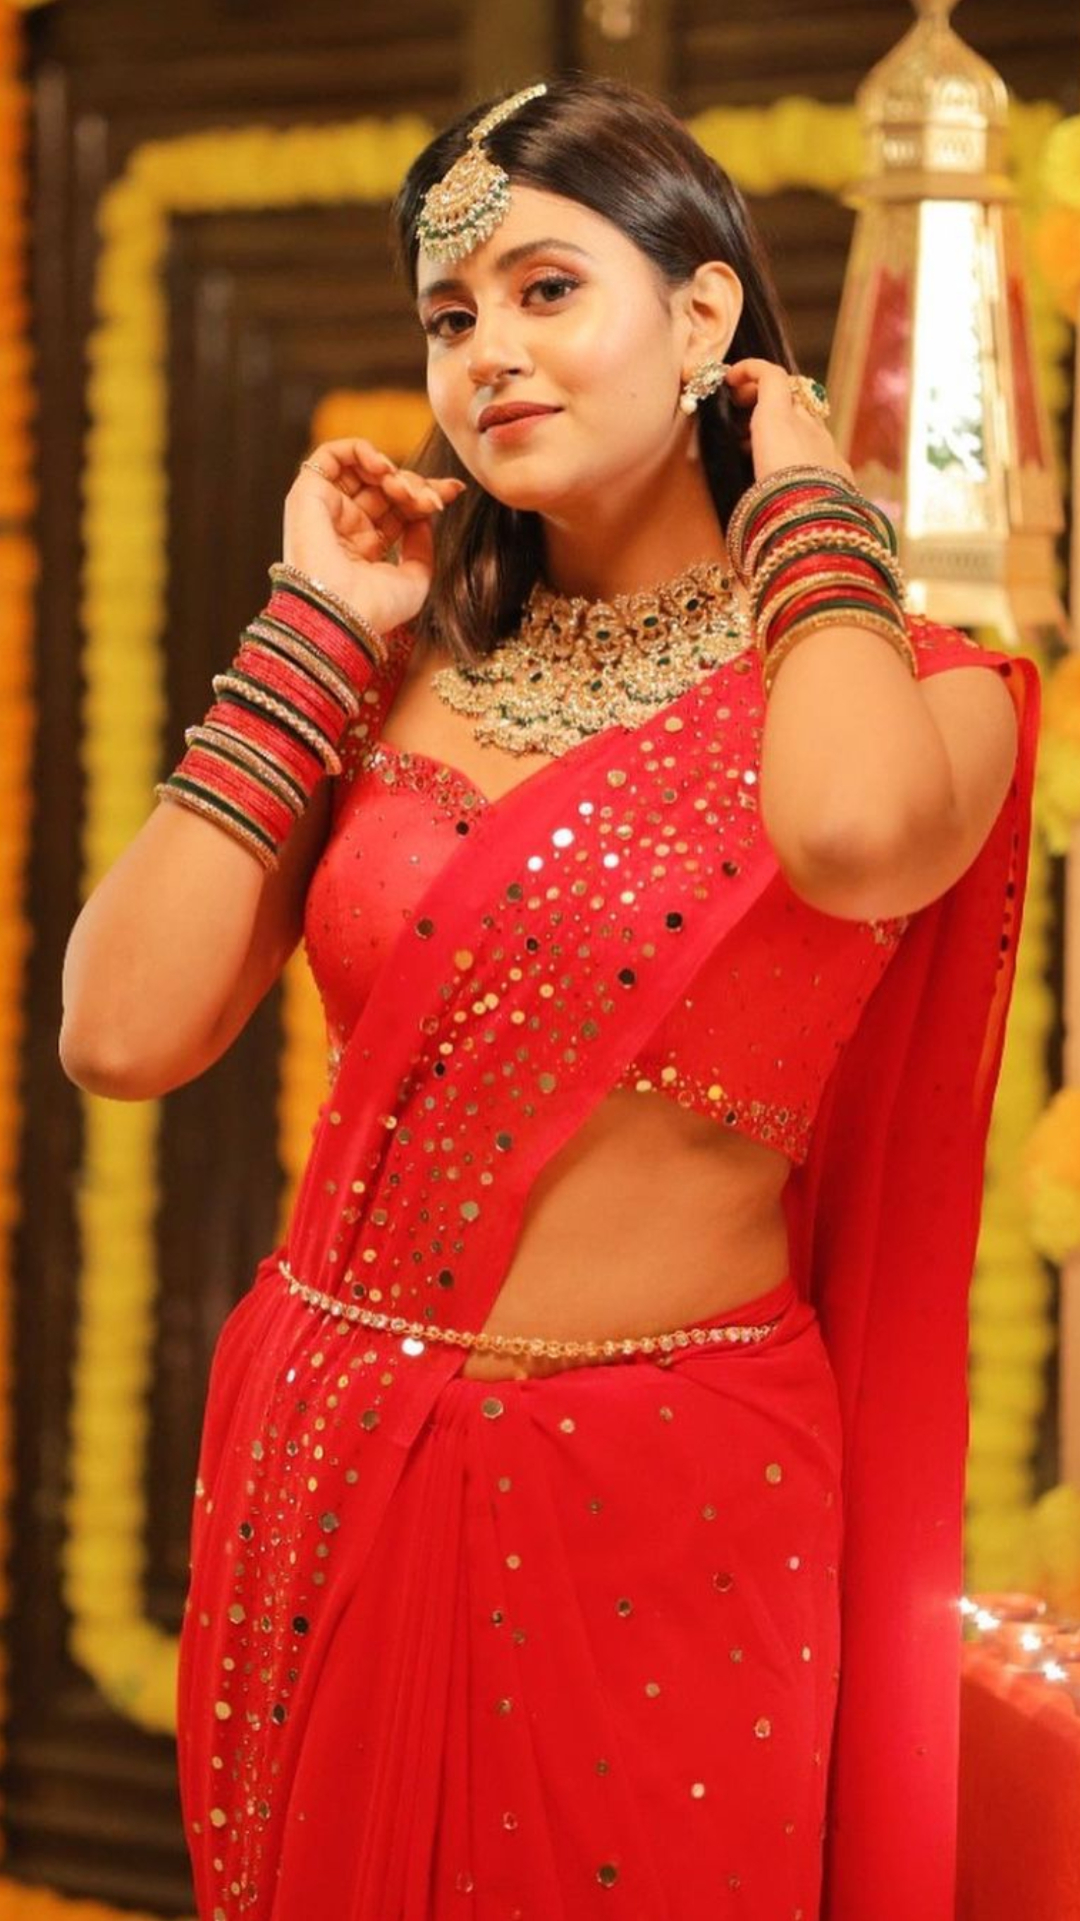 Anjali Arora's never seen before avatar in red saree &amp; traditional jewellery enchants fans 